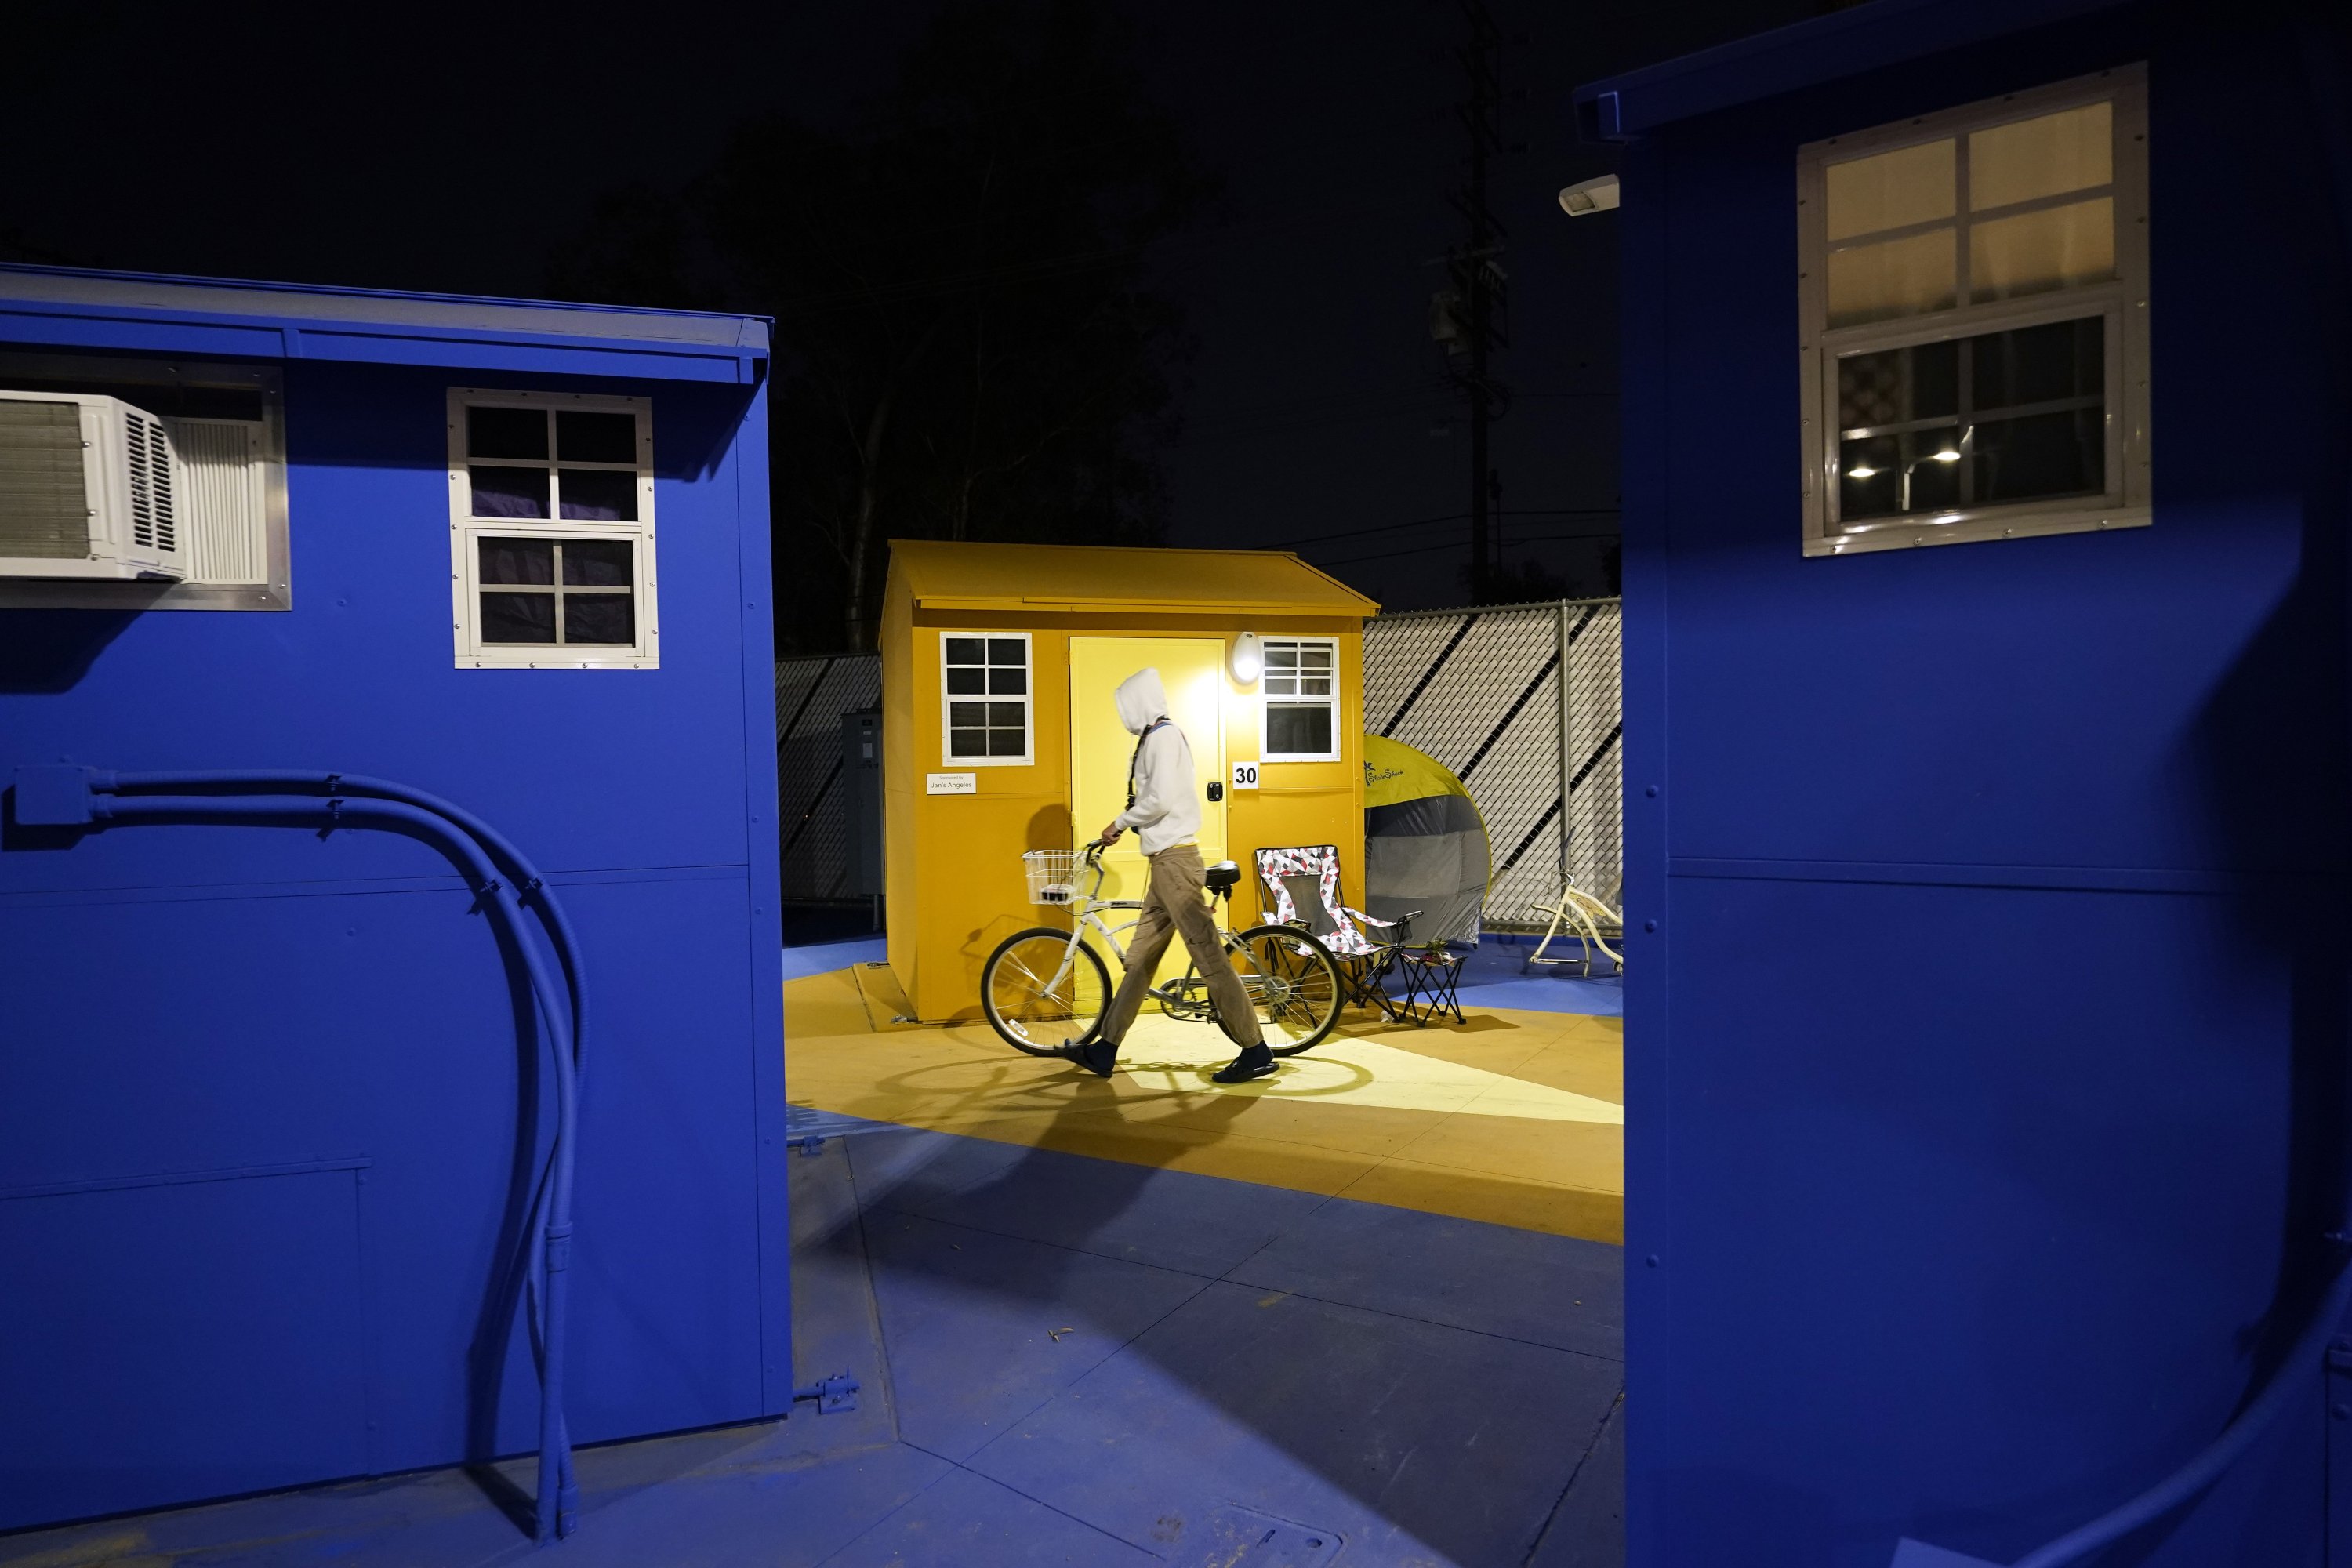 La Opens Its First Tiny Home Village To Ease Homeless Crisis